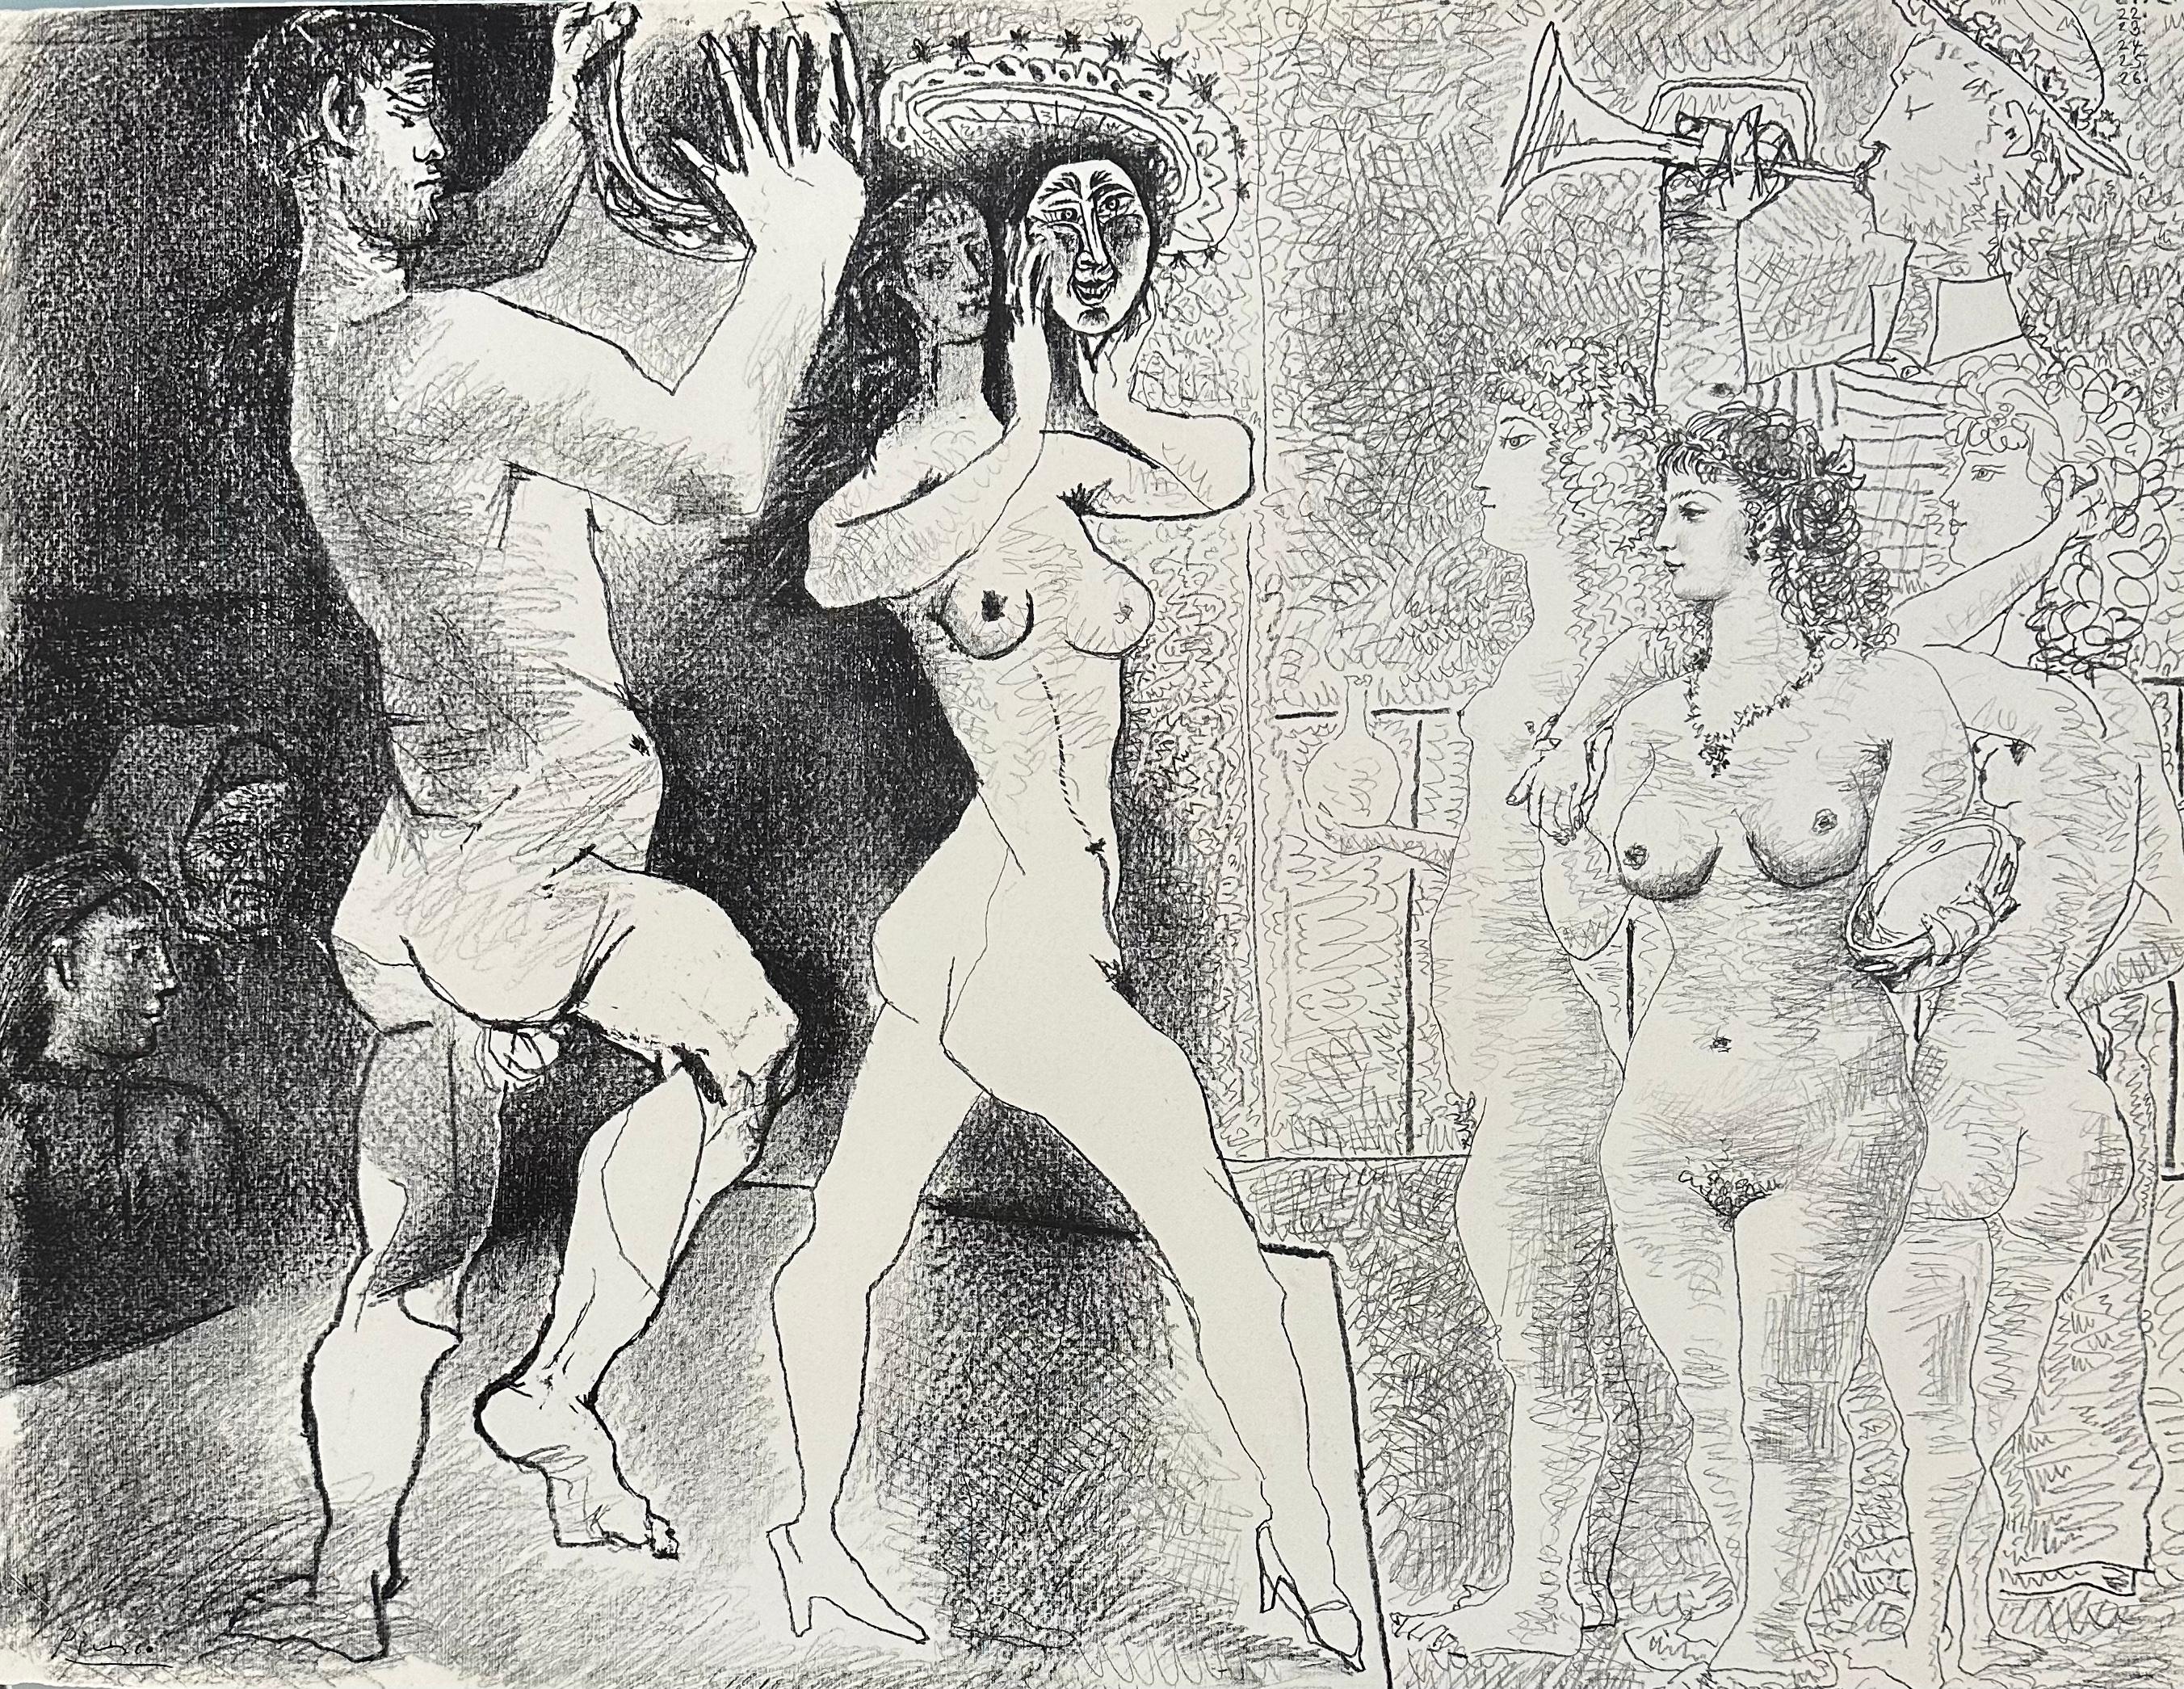 Pablo Picasso
The Rehearsal, (La Répétition)
Original Lithograph, (litho crayon composition on transfer paper, transferred to stone)
Hand signed in ink in lower left corner
Numbered 5/50 from the edition of 50
Bloch 756, Mourlot 252
19.75 x 25.75